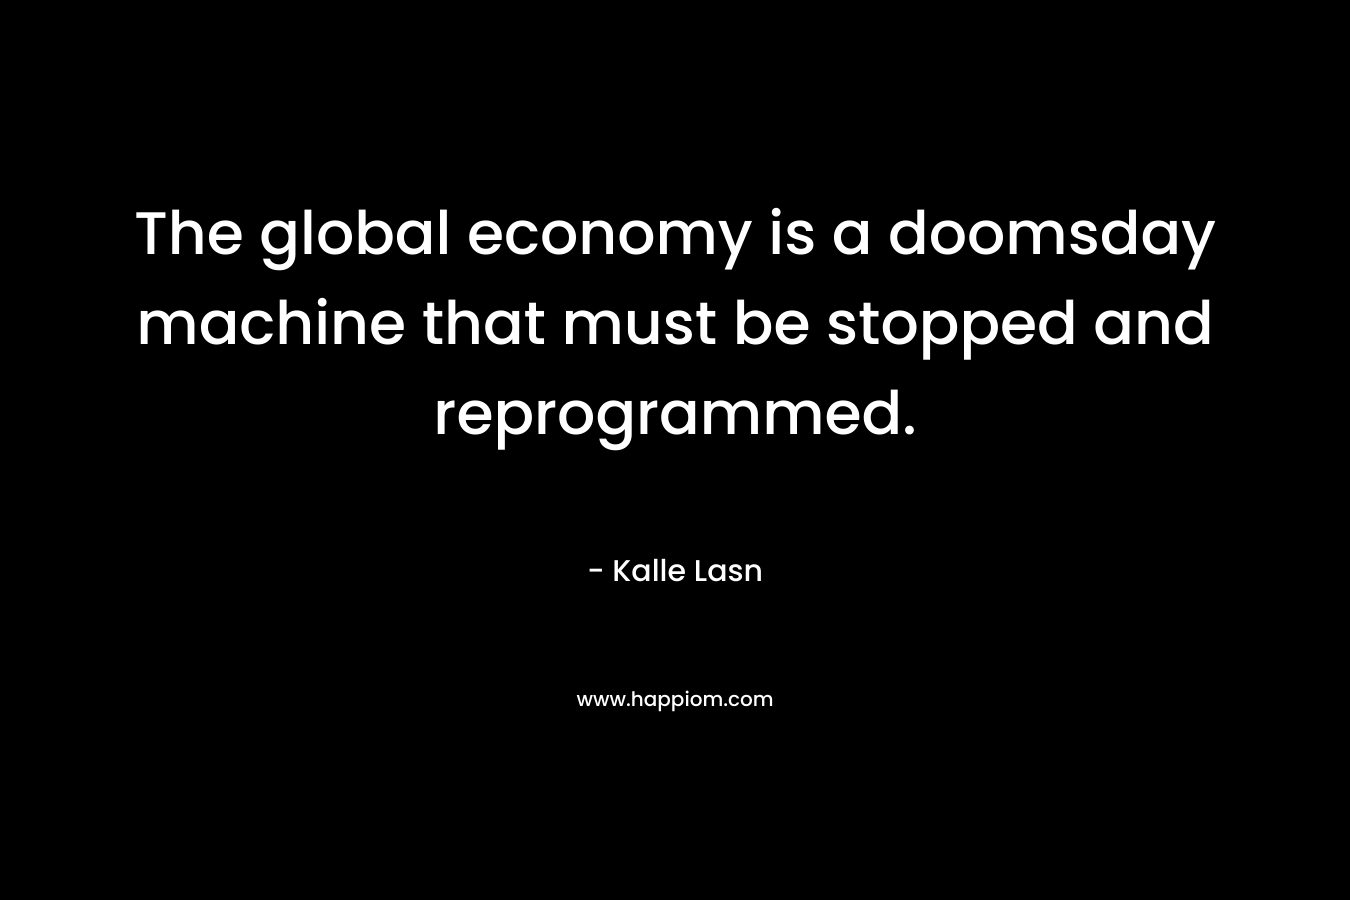 The global economy is a doomsday machine that must be stopped and reprogrammed. – Kalle Lasn